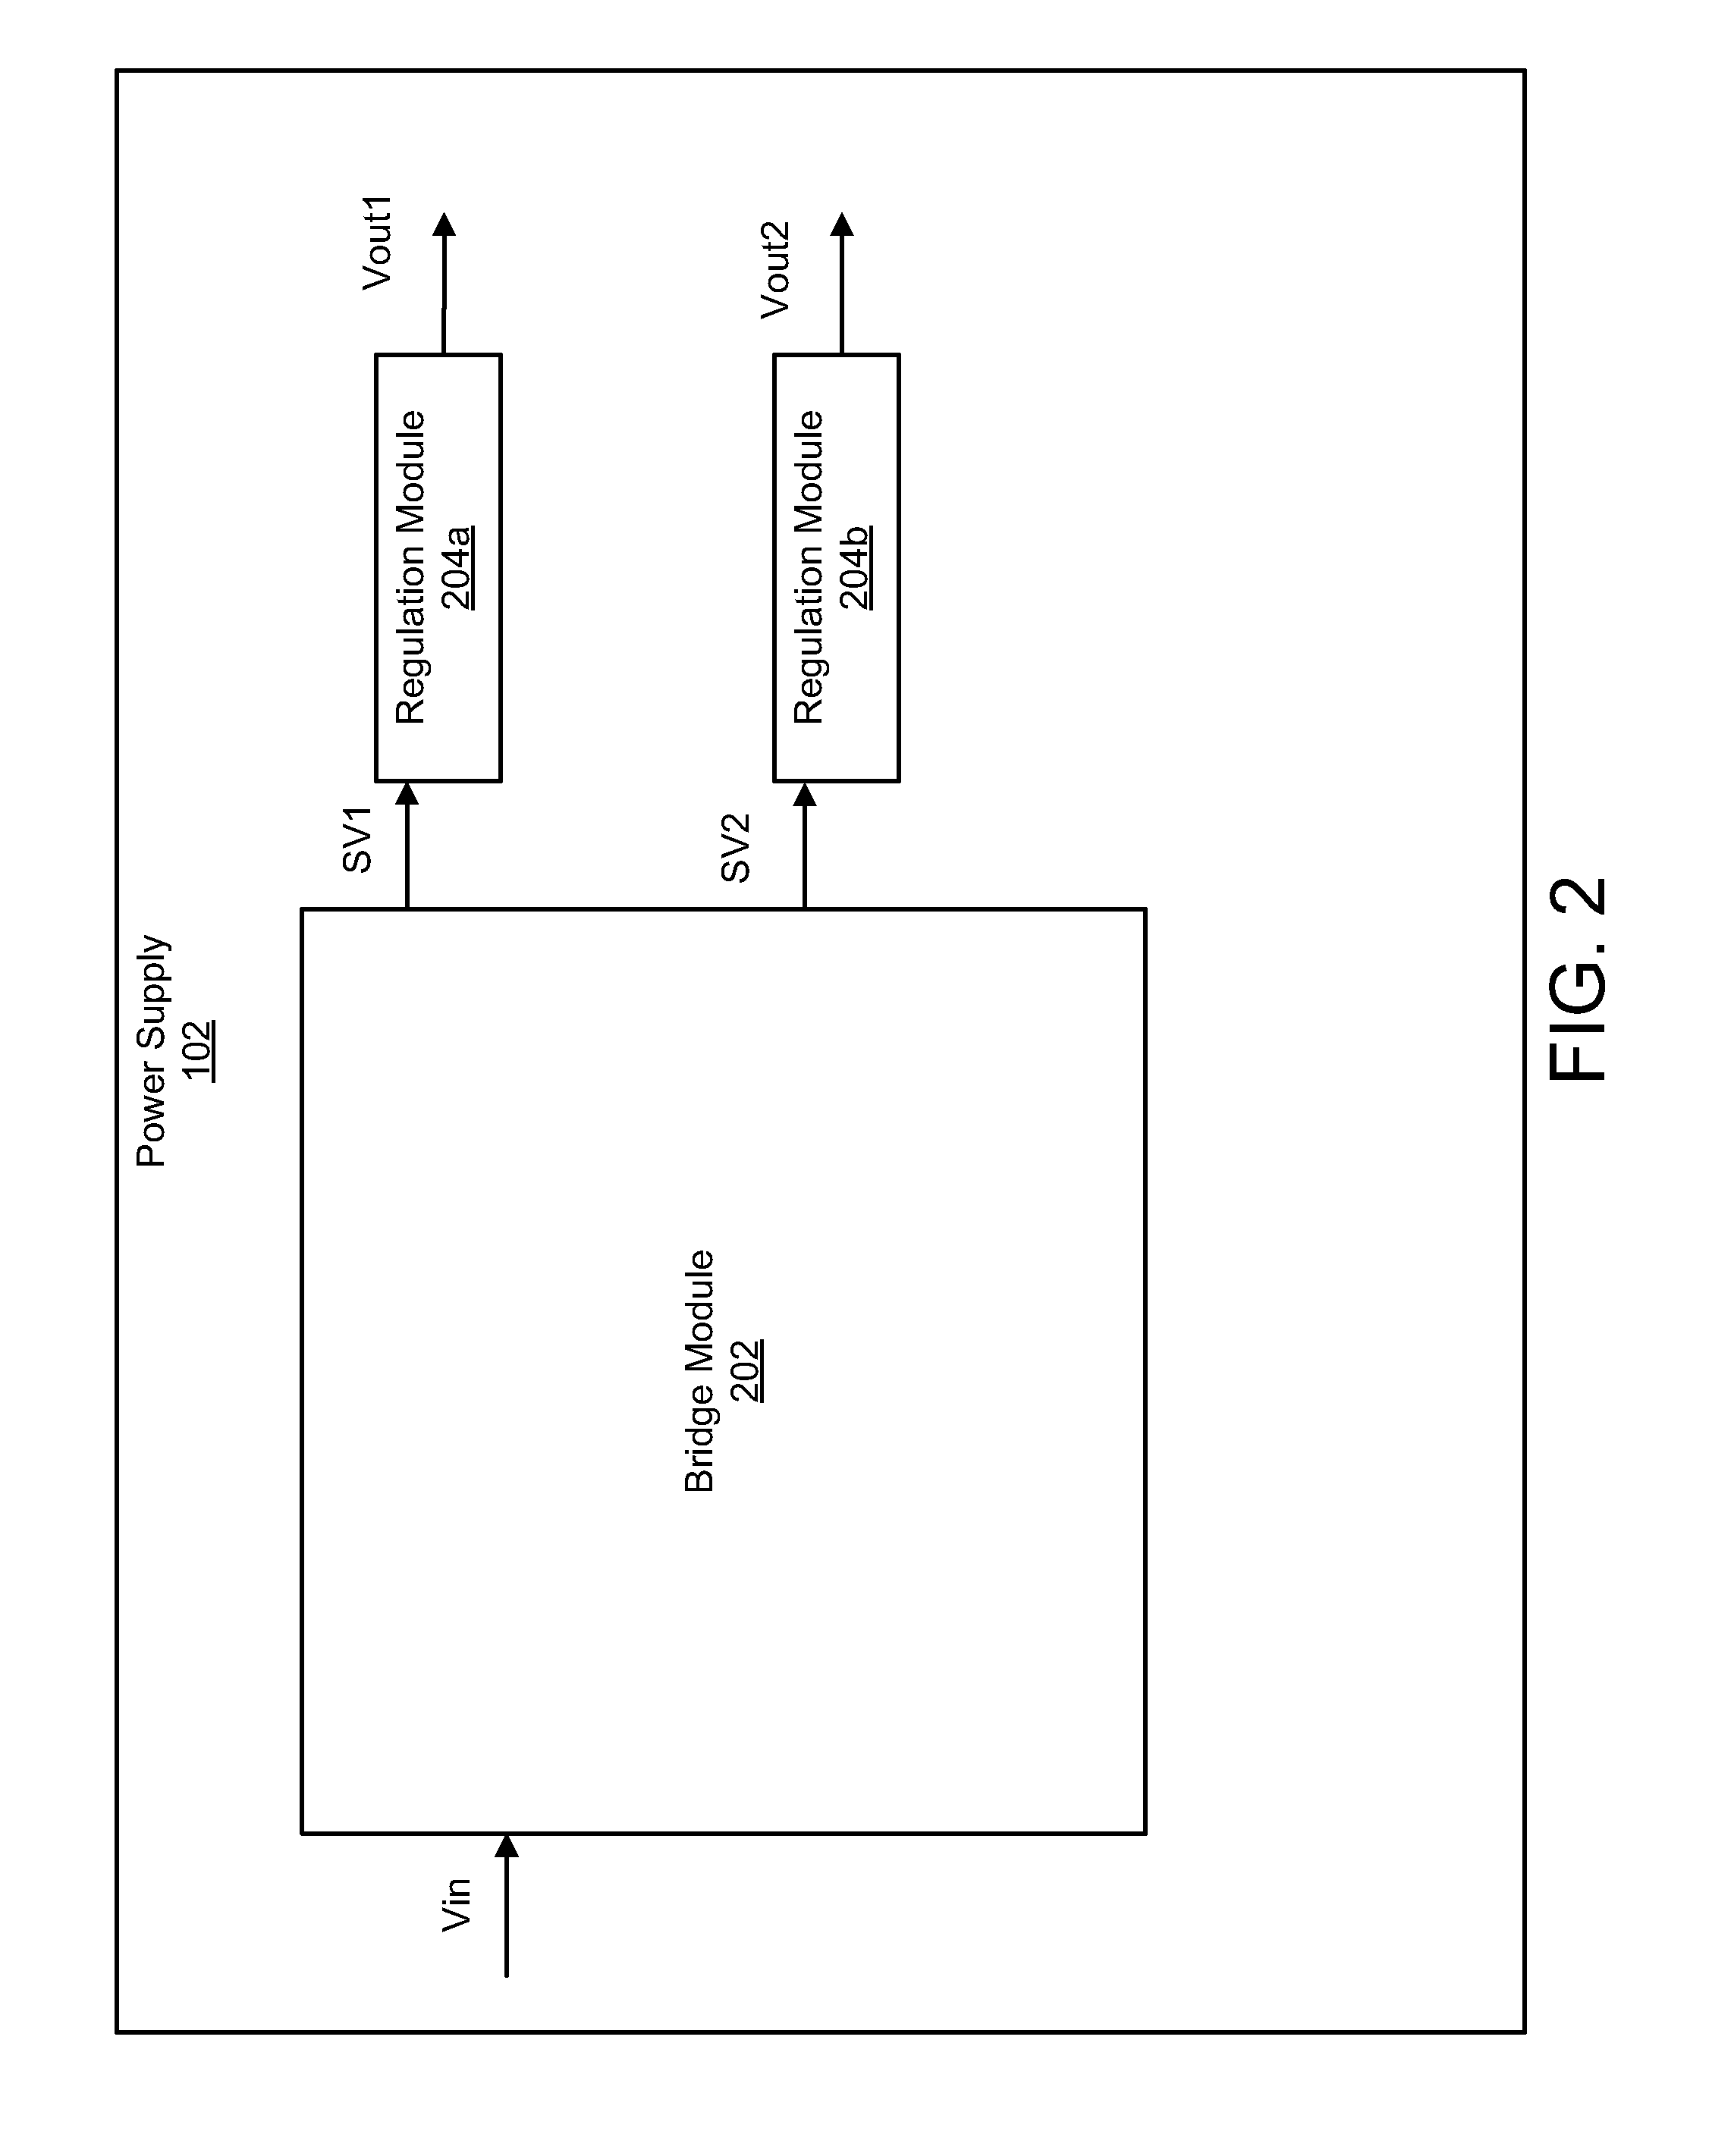 Apparatus, system, and method for a synchronous multiple output power supply